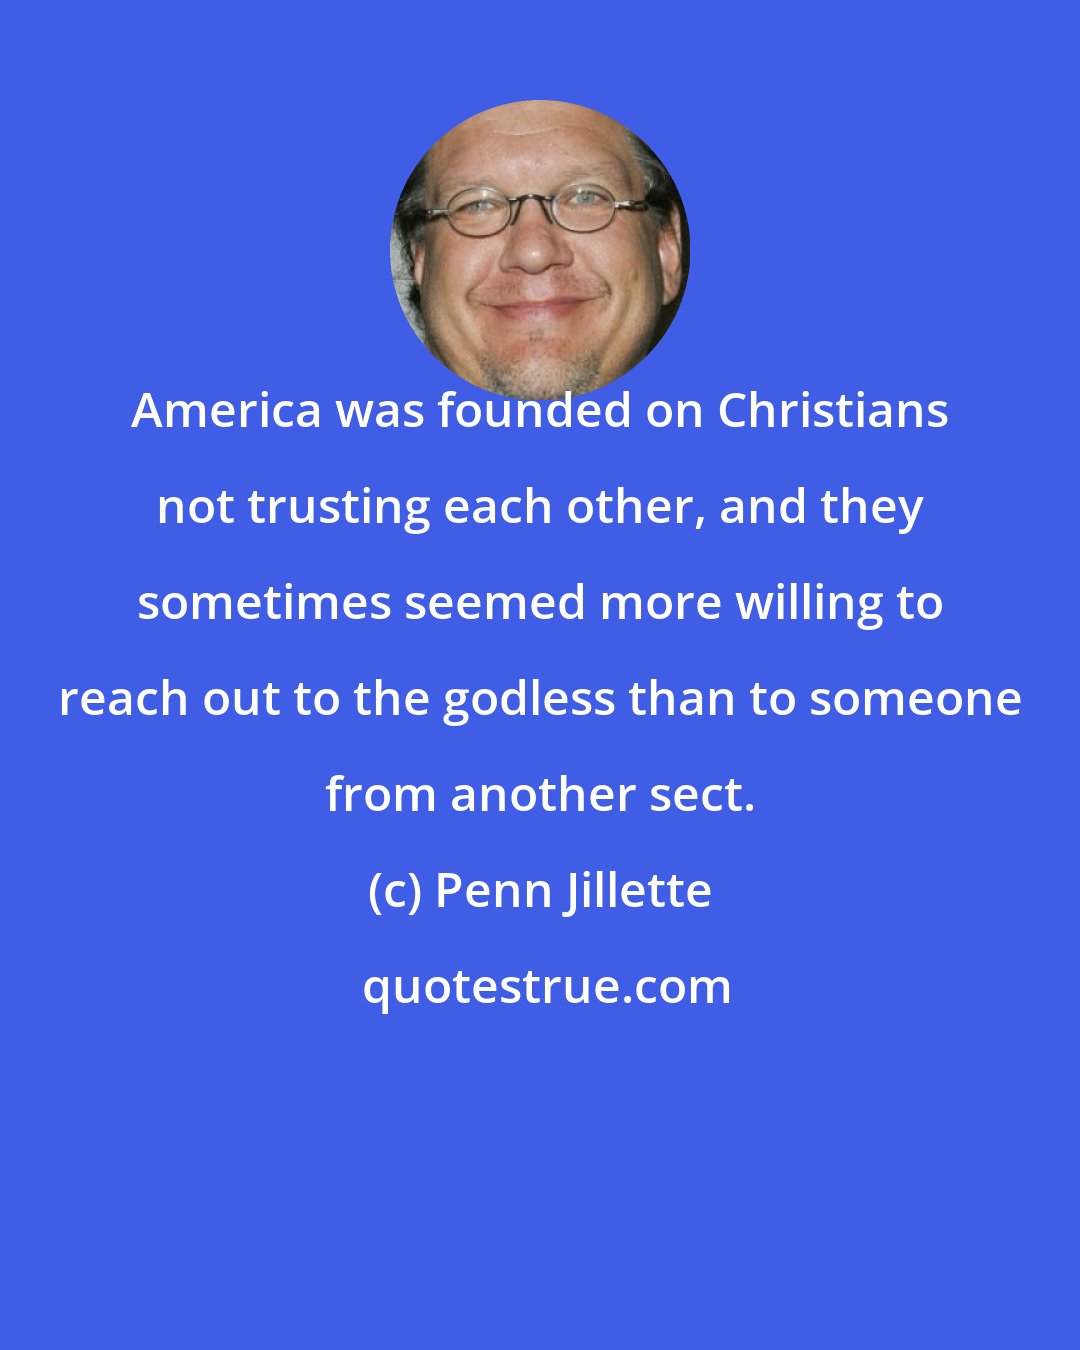 Penn Jillette: America was founded on Christians not trusting each other, and they sometimes seemed more willing to reach out to the godless than to someone from another sect.